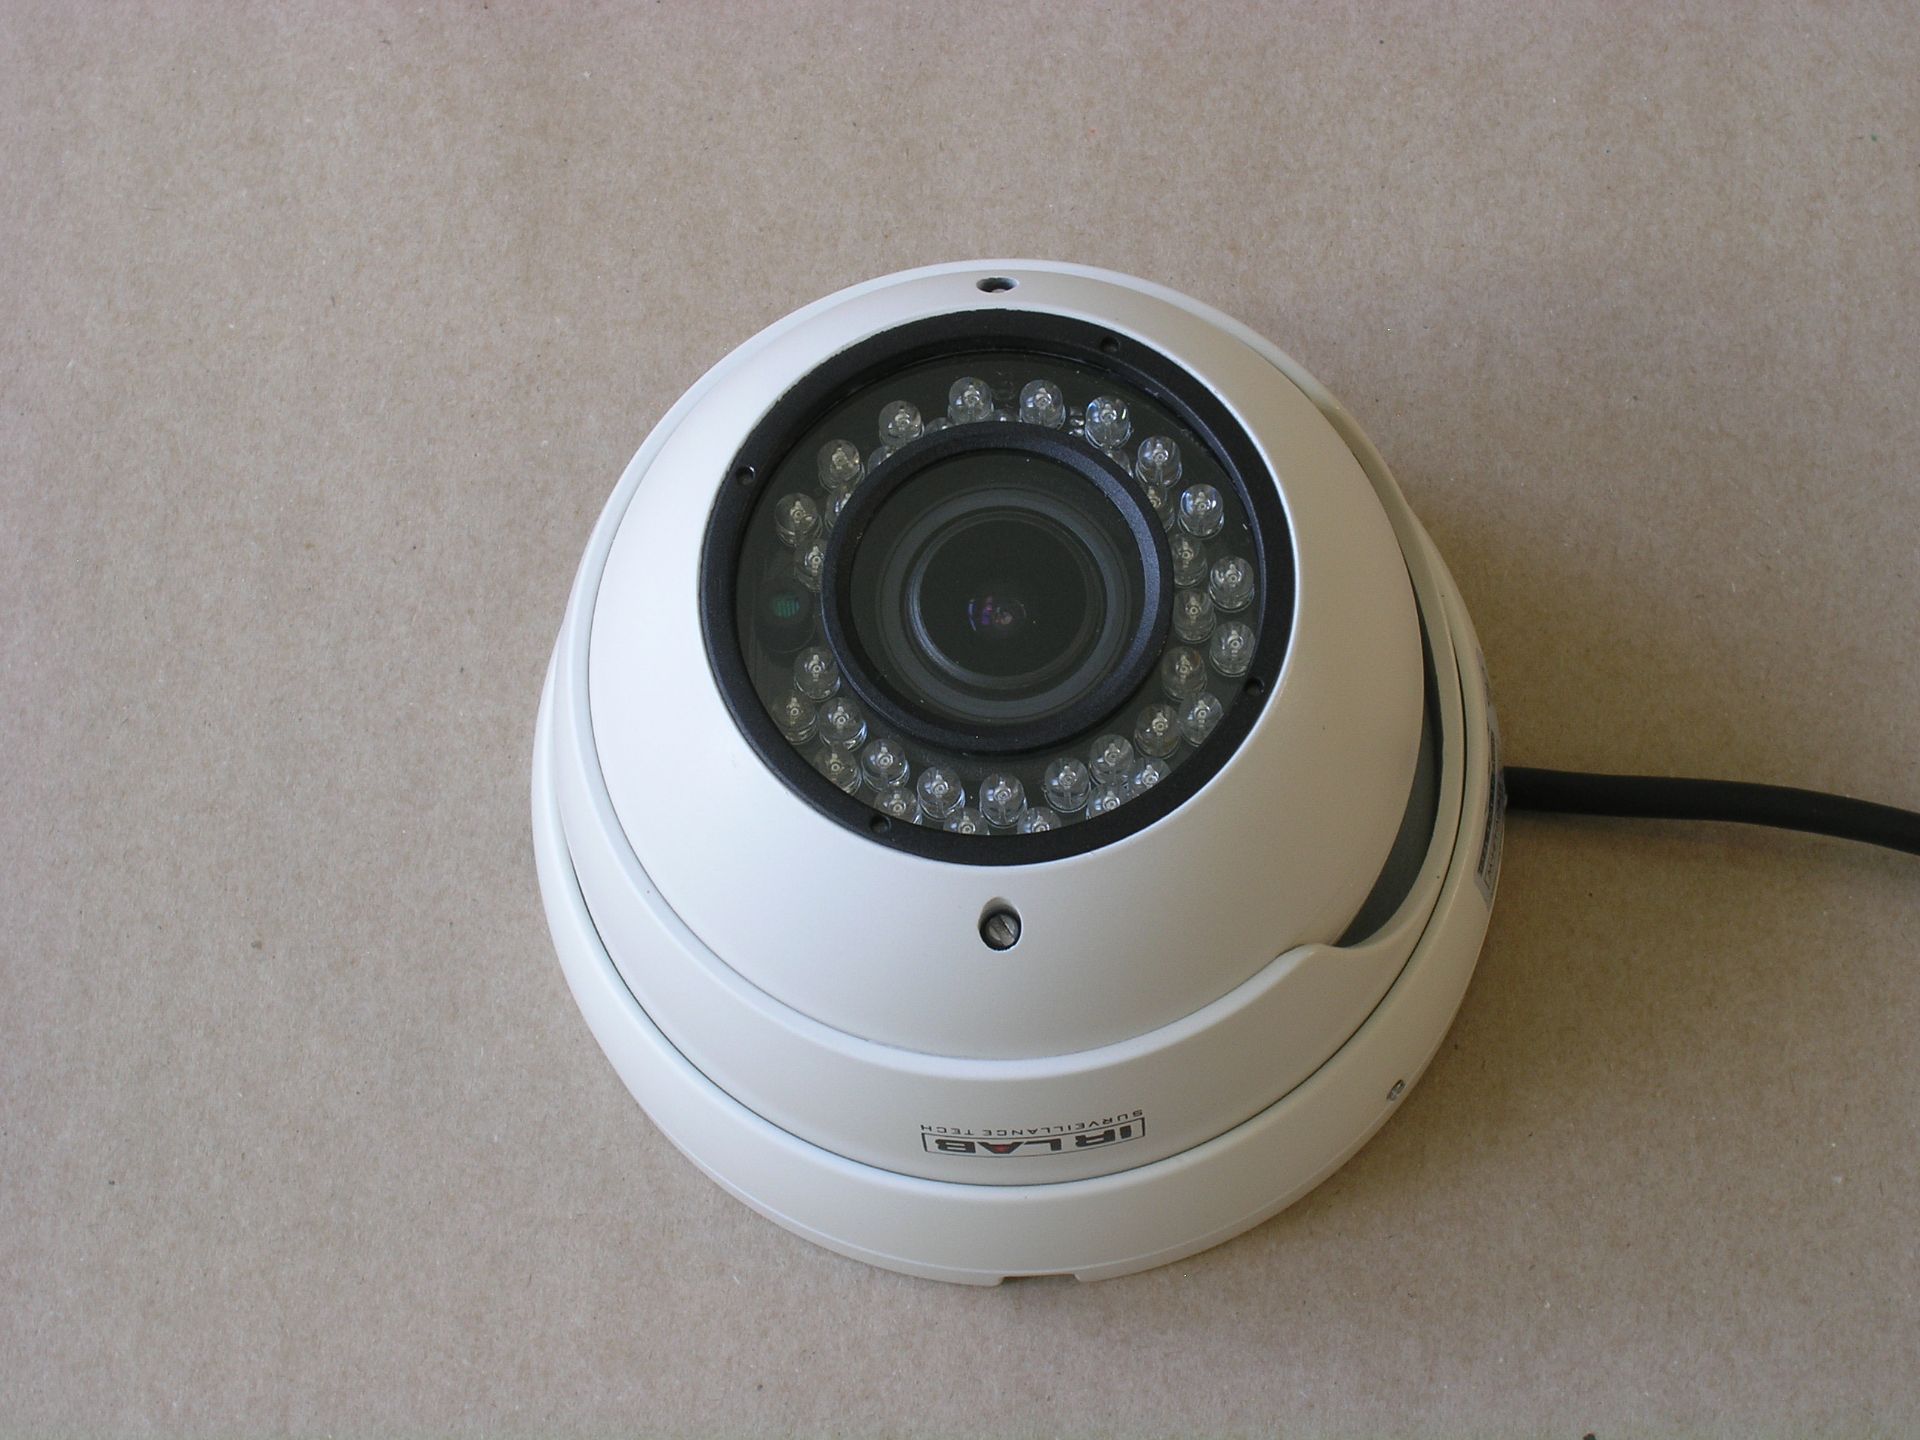 * 2 x New and boxed IRLAB Professional Colour CCTV Anti-Vandal Dome Camera with Sony 1/3'' CCD - Image 6 of 6